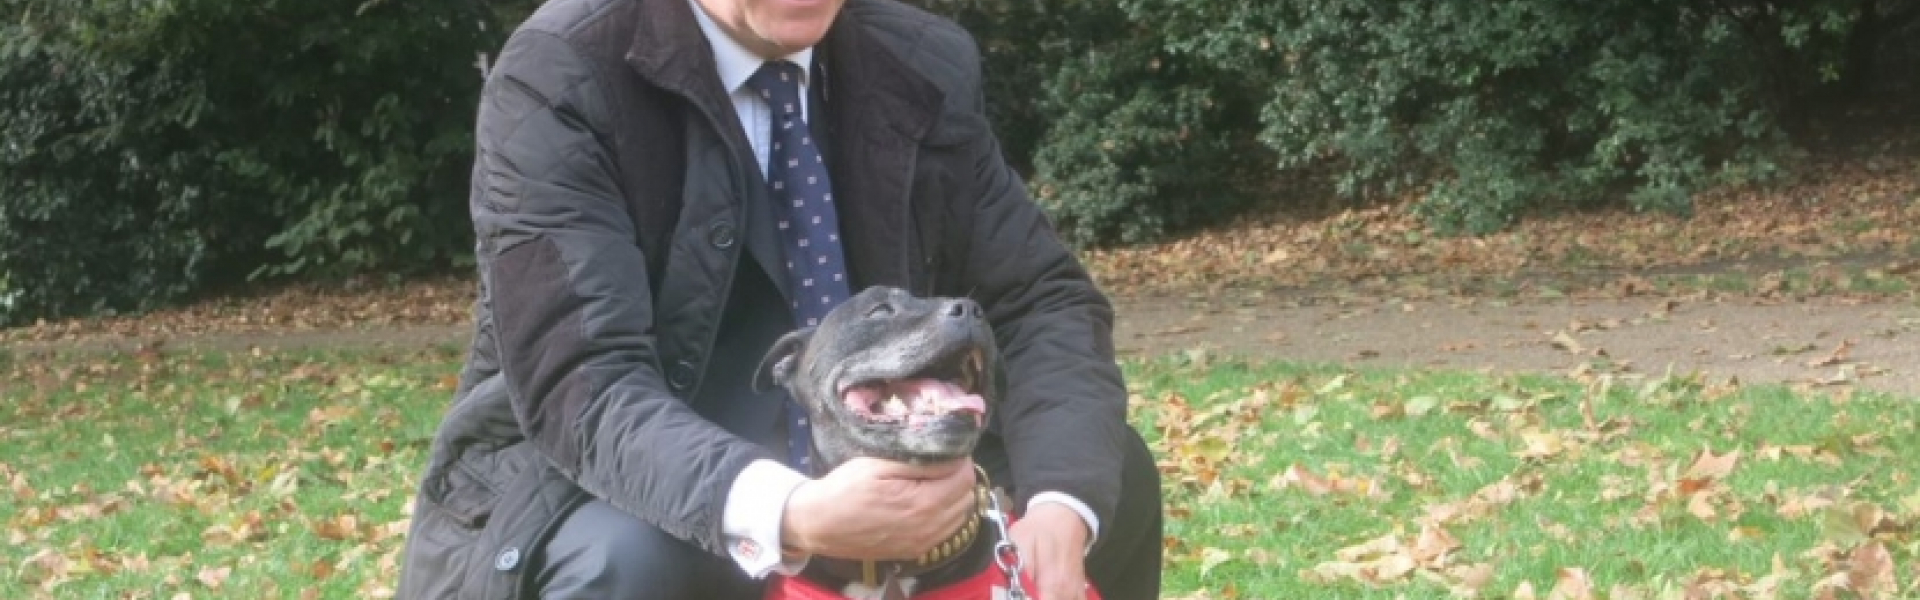 Andrew Rosindell MP with his dog, Buster